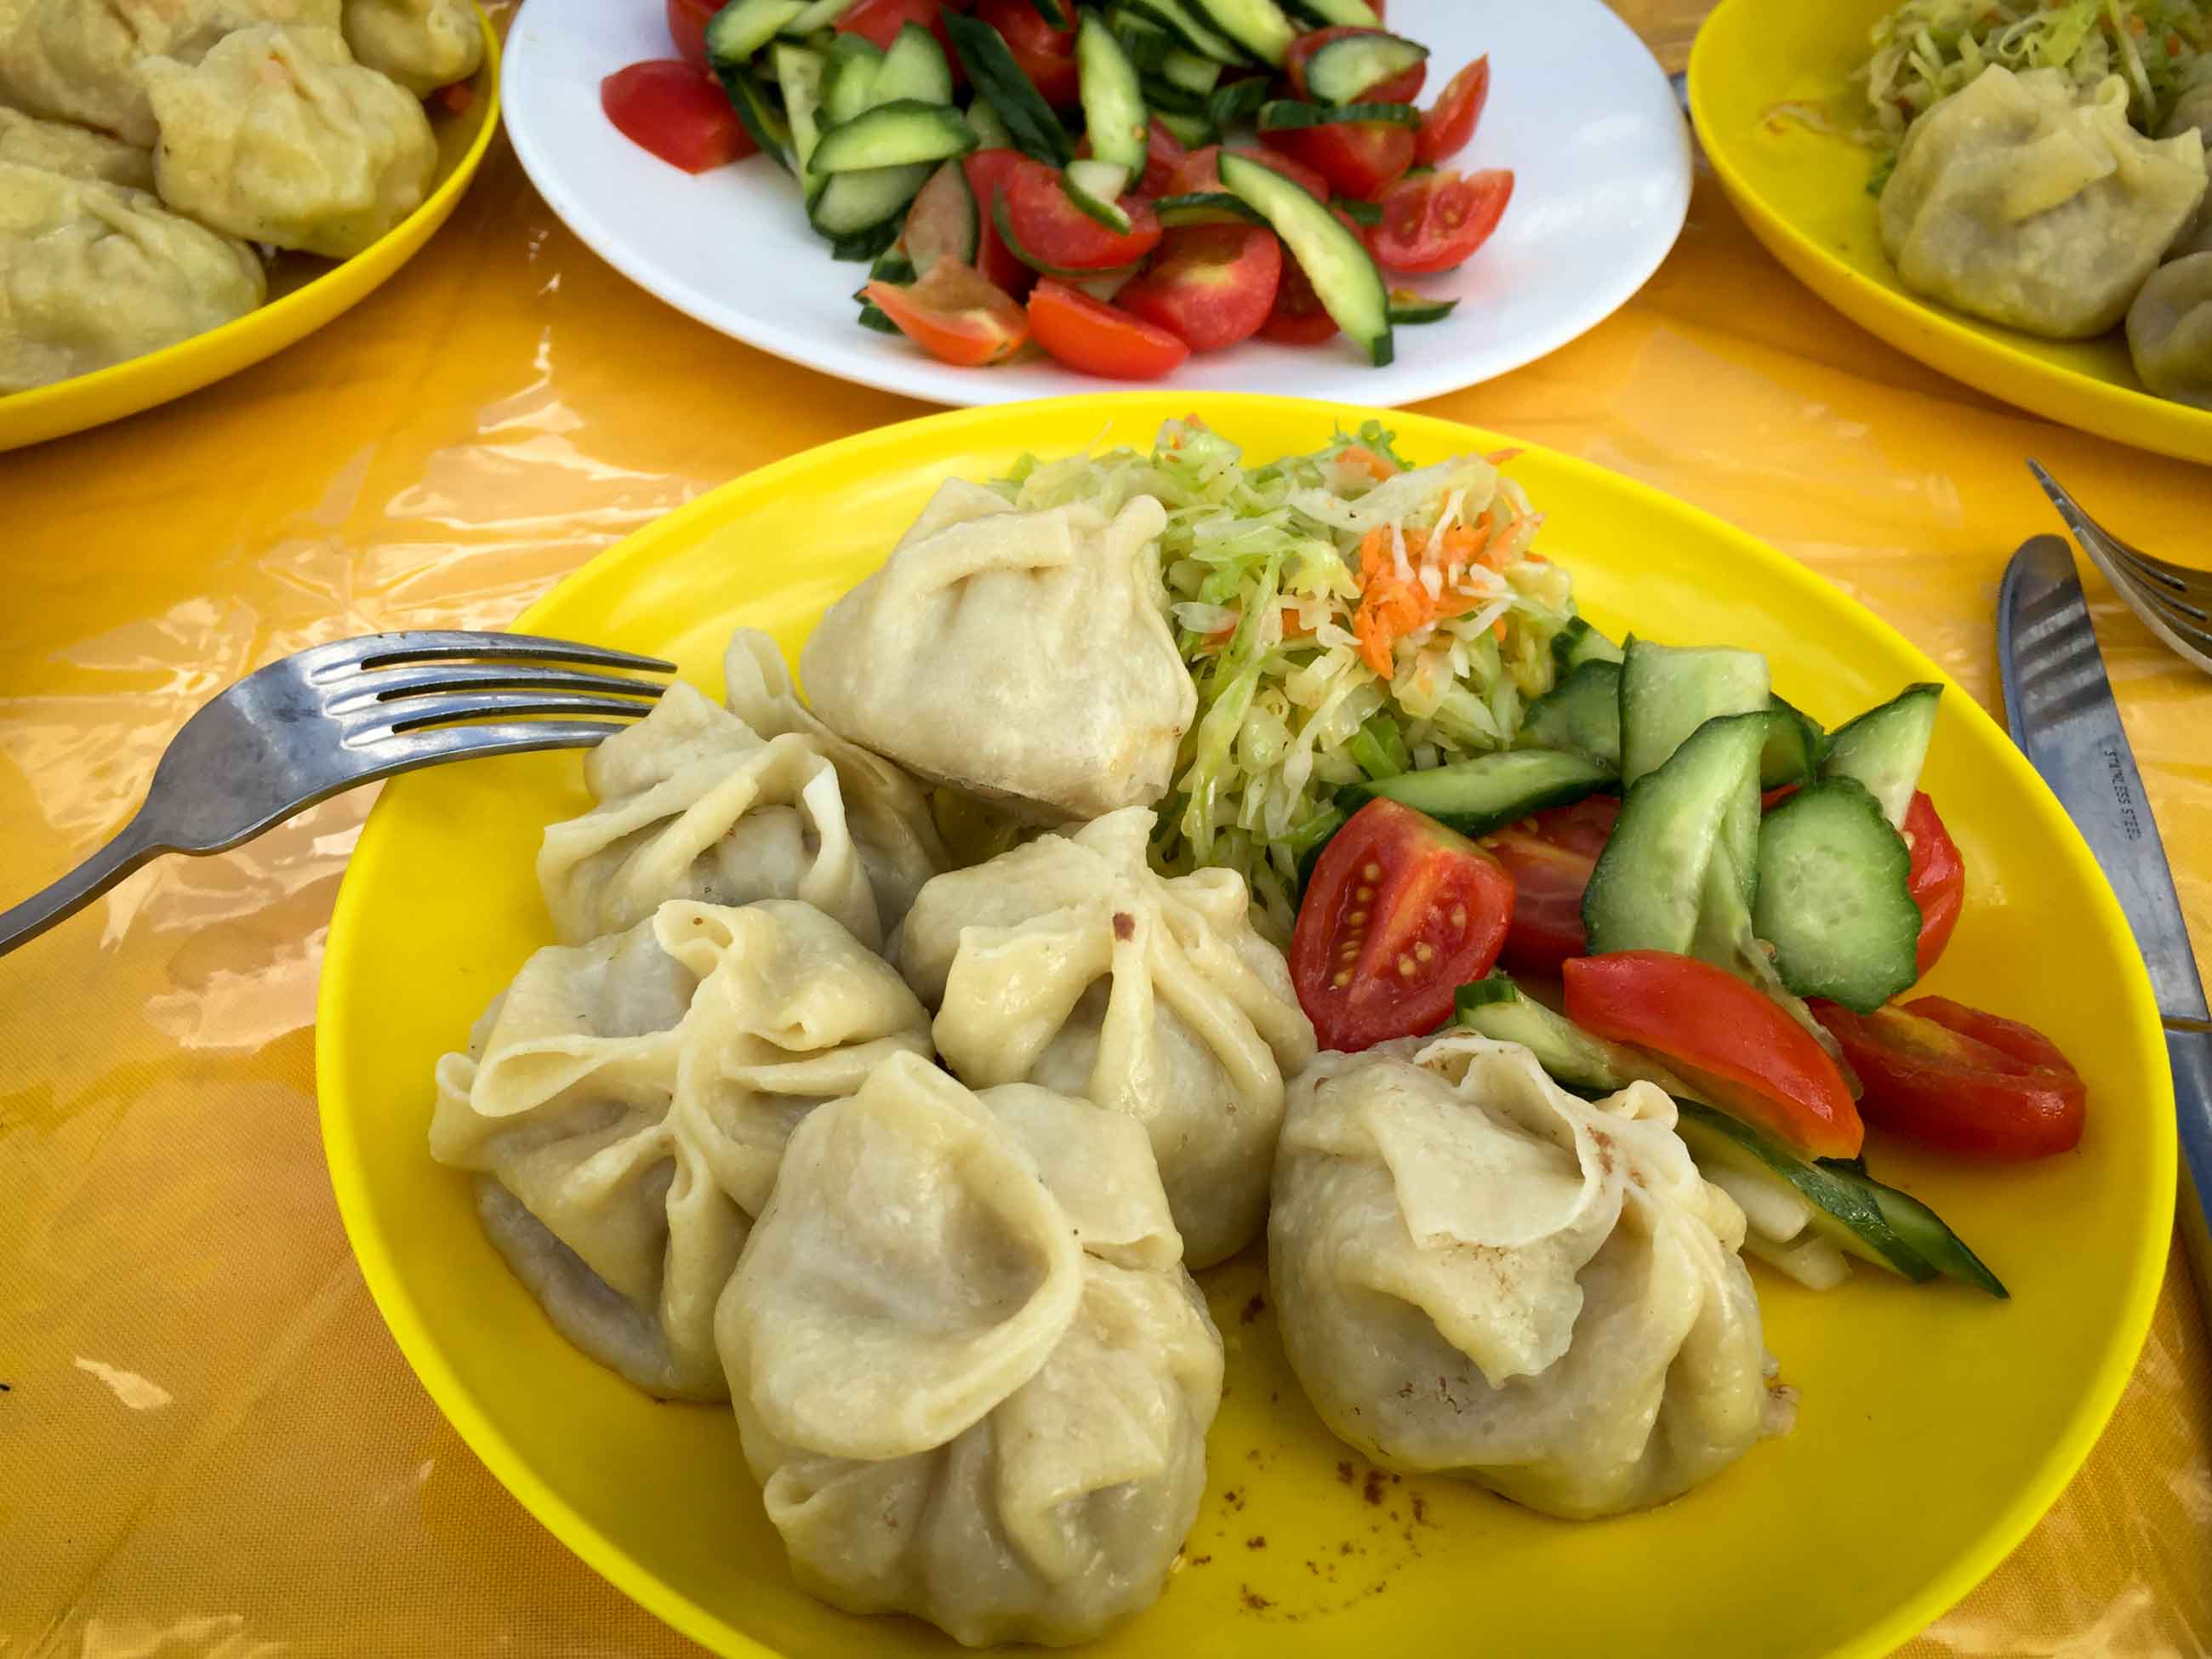 Camping food in Mongolia 